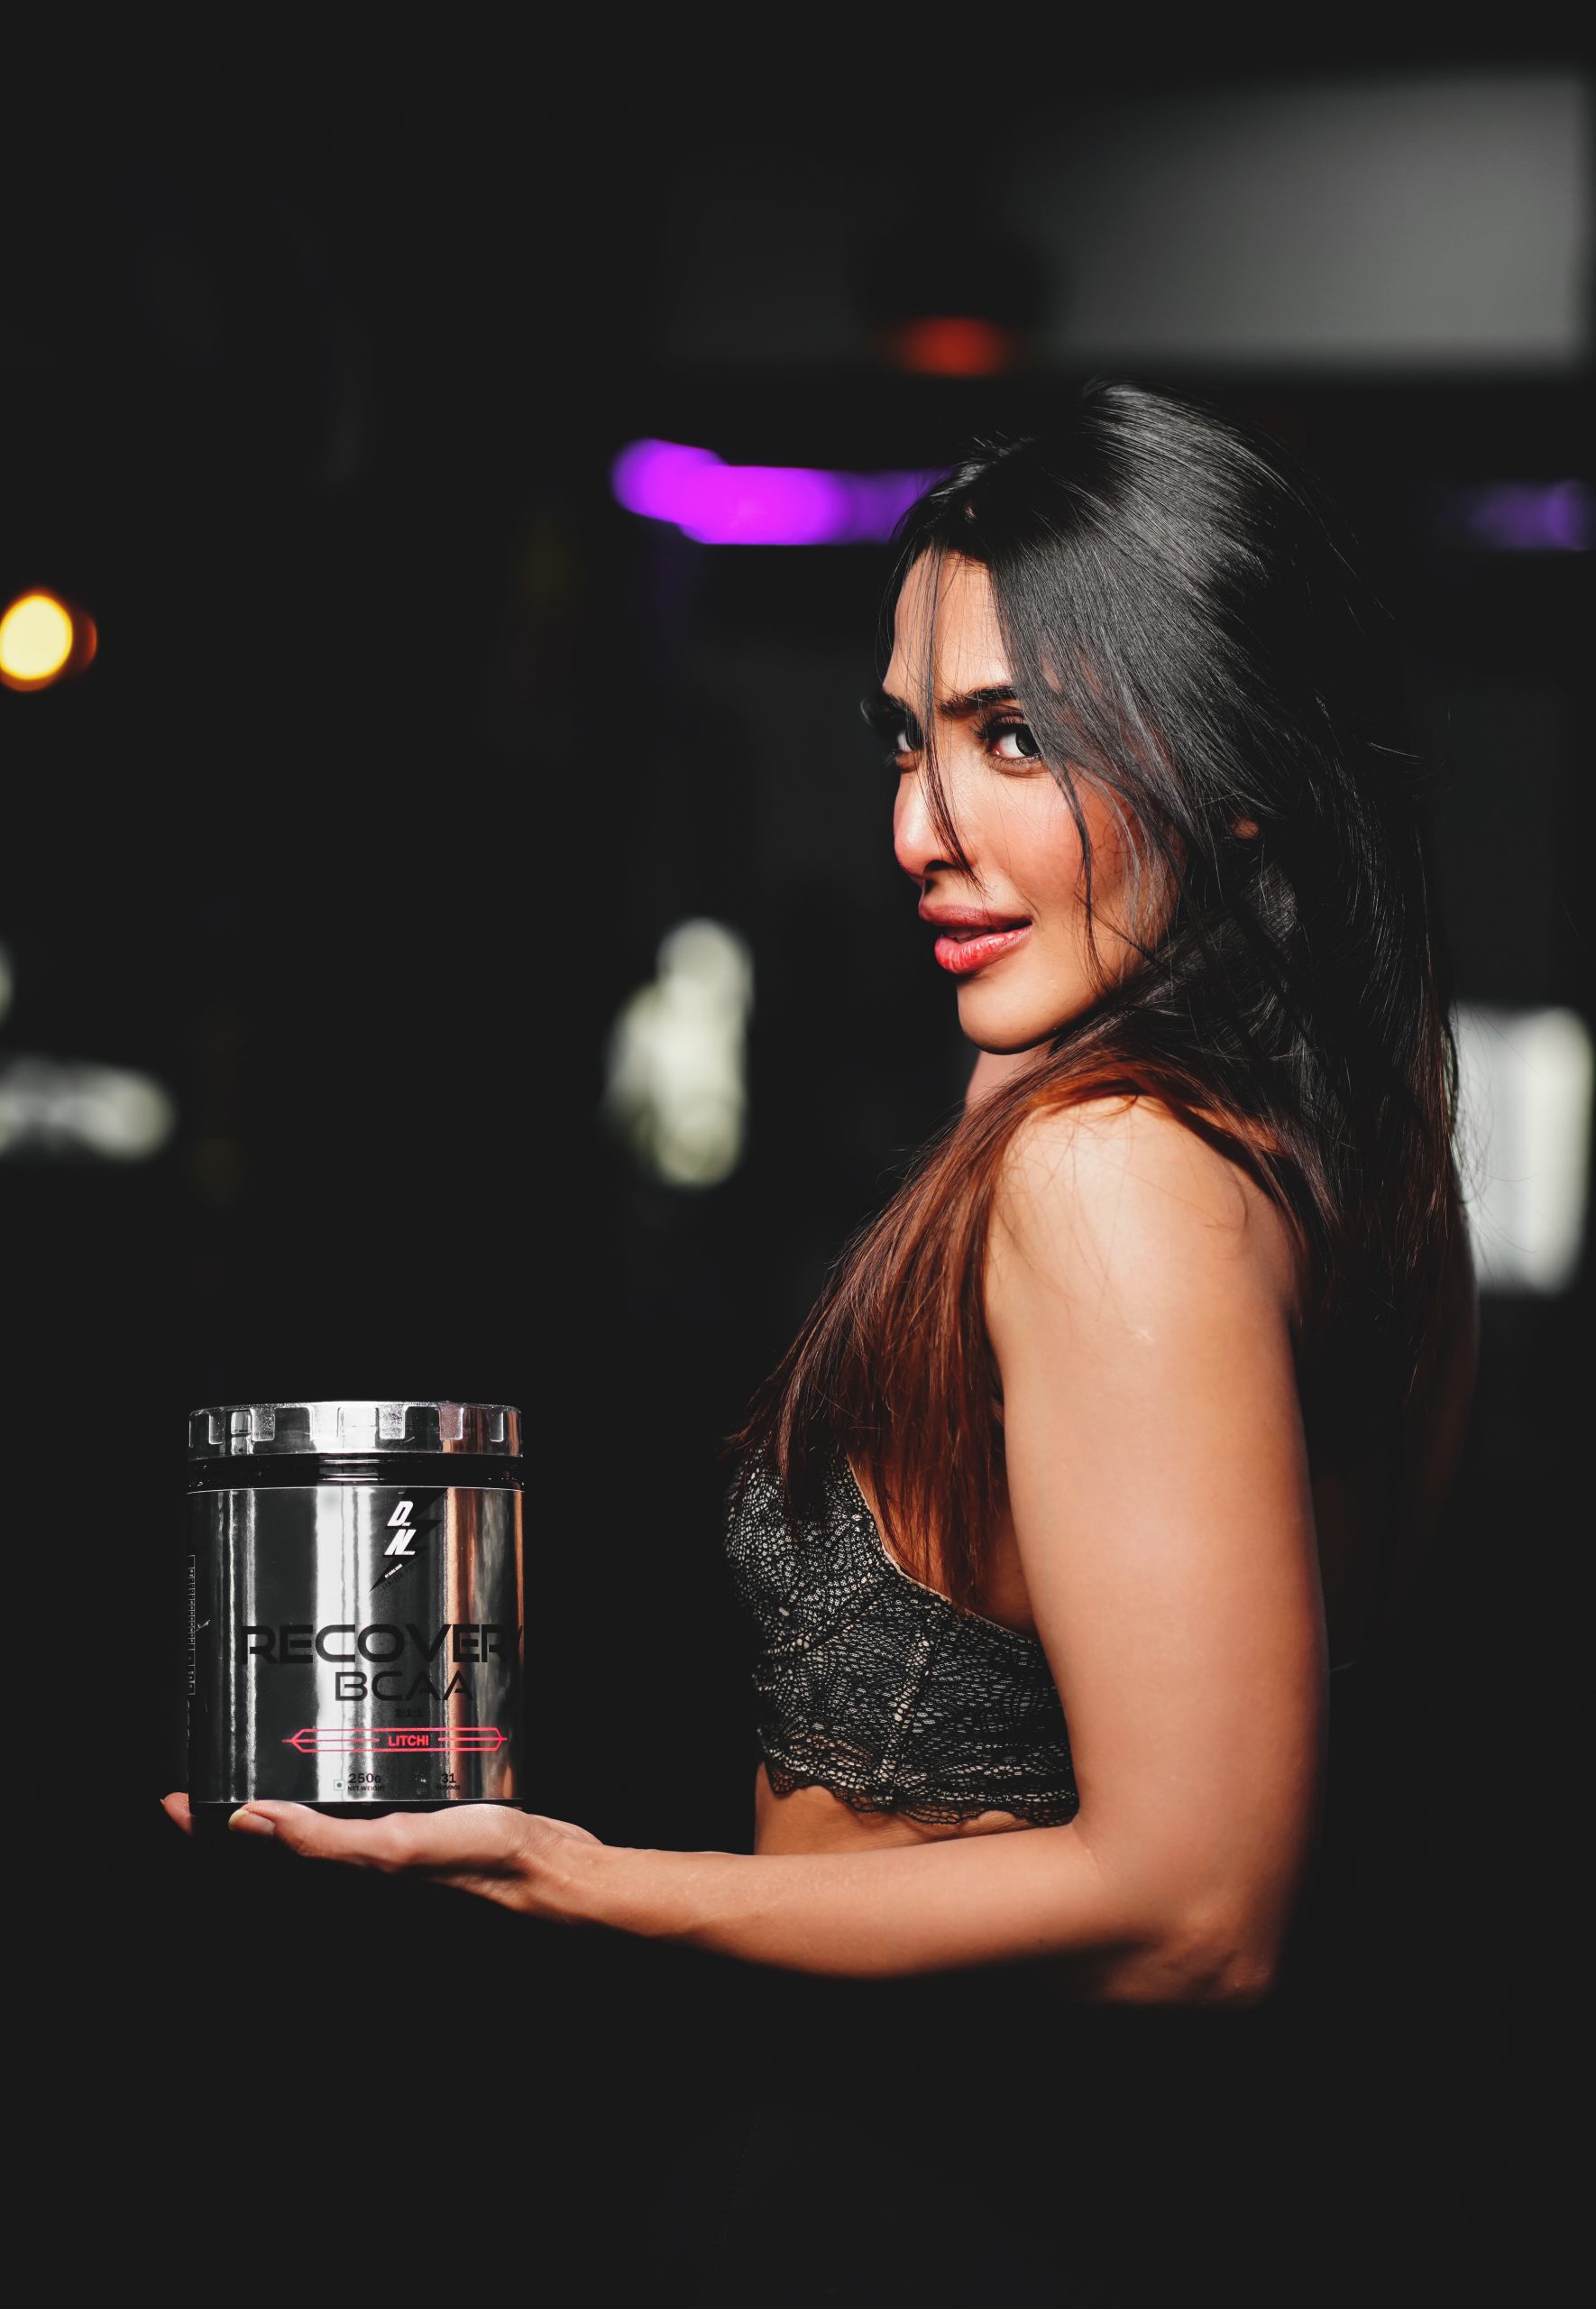 Female gym model showing supplement product